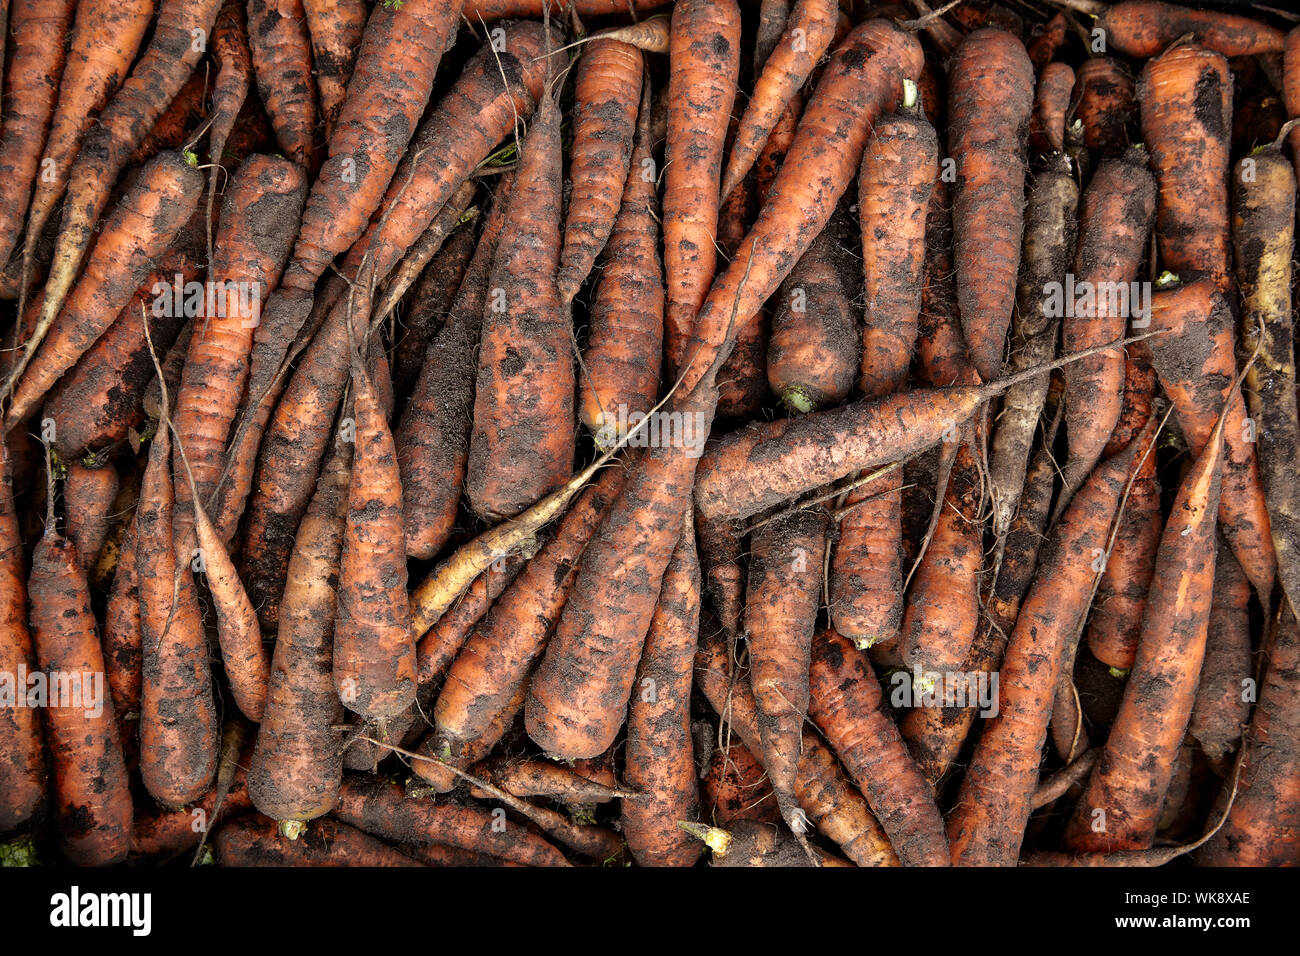 Display of freshly harvested carrots before rinsing Stock Photo